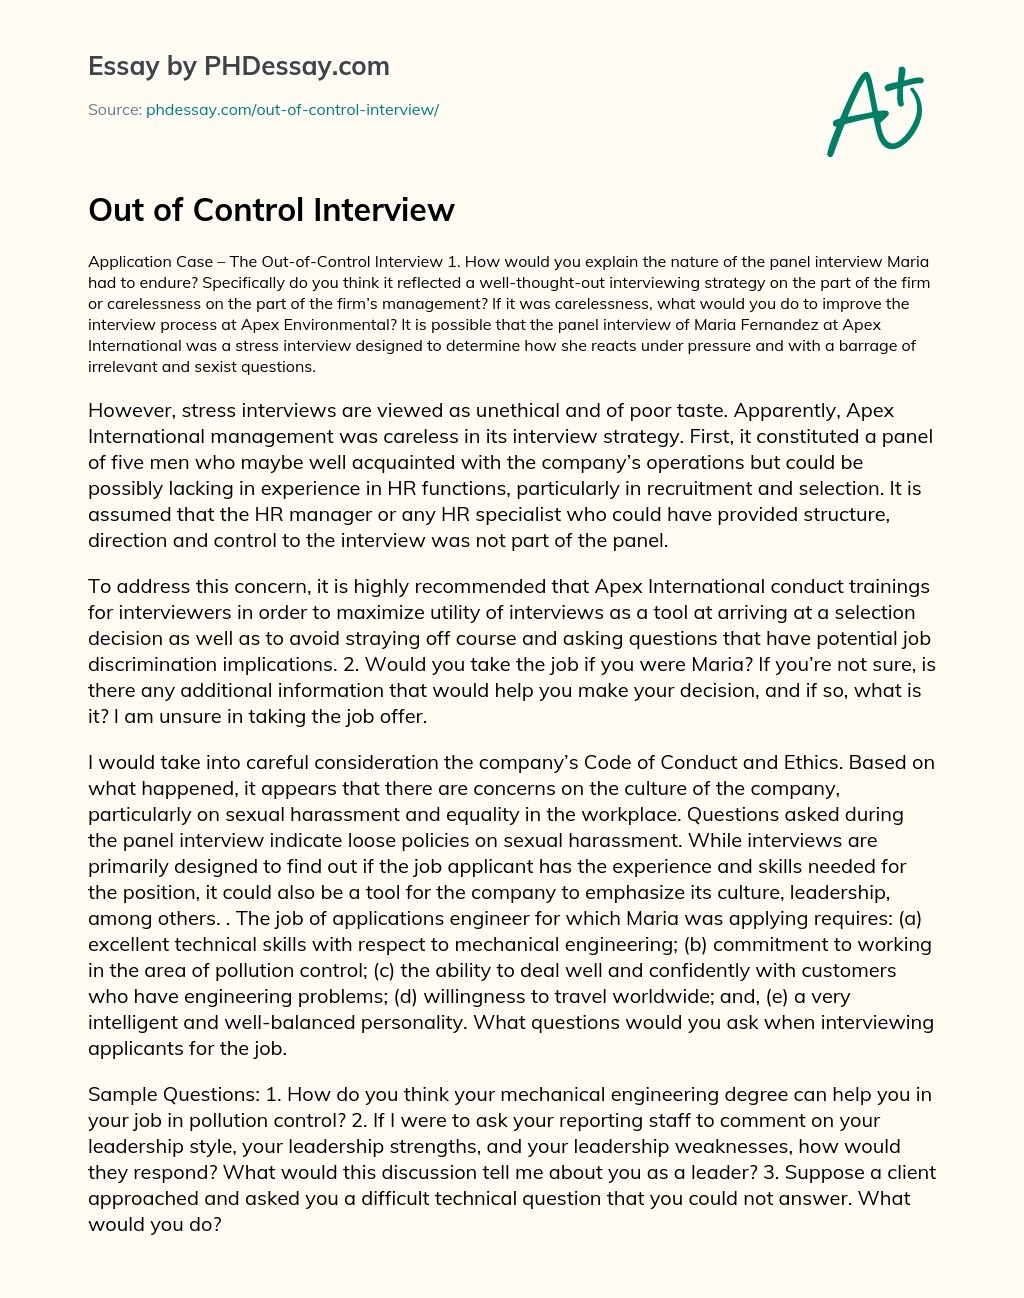 out of control interview case study